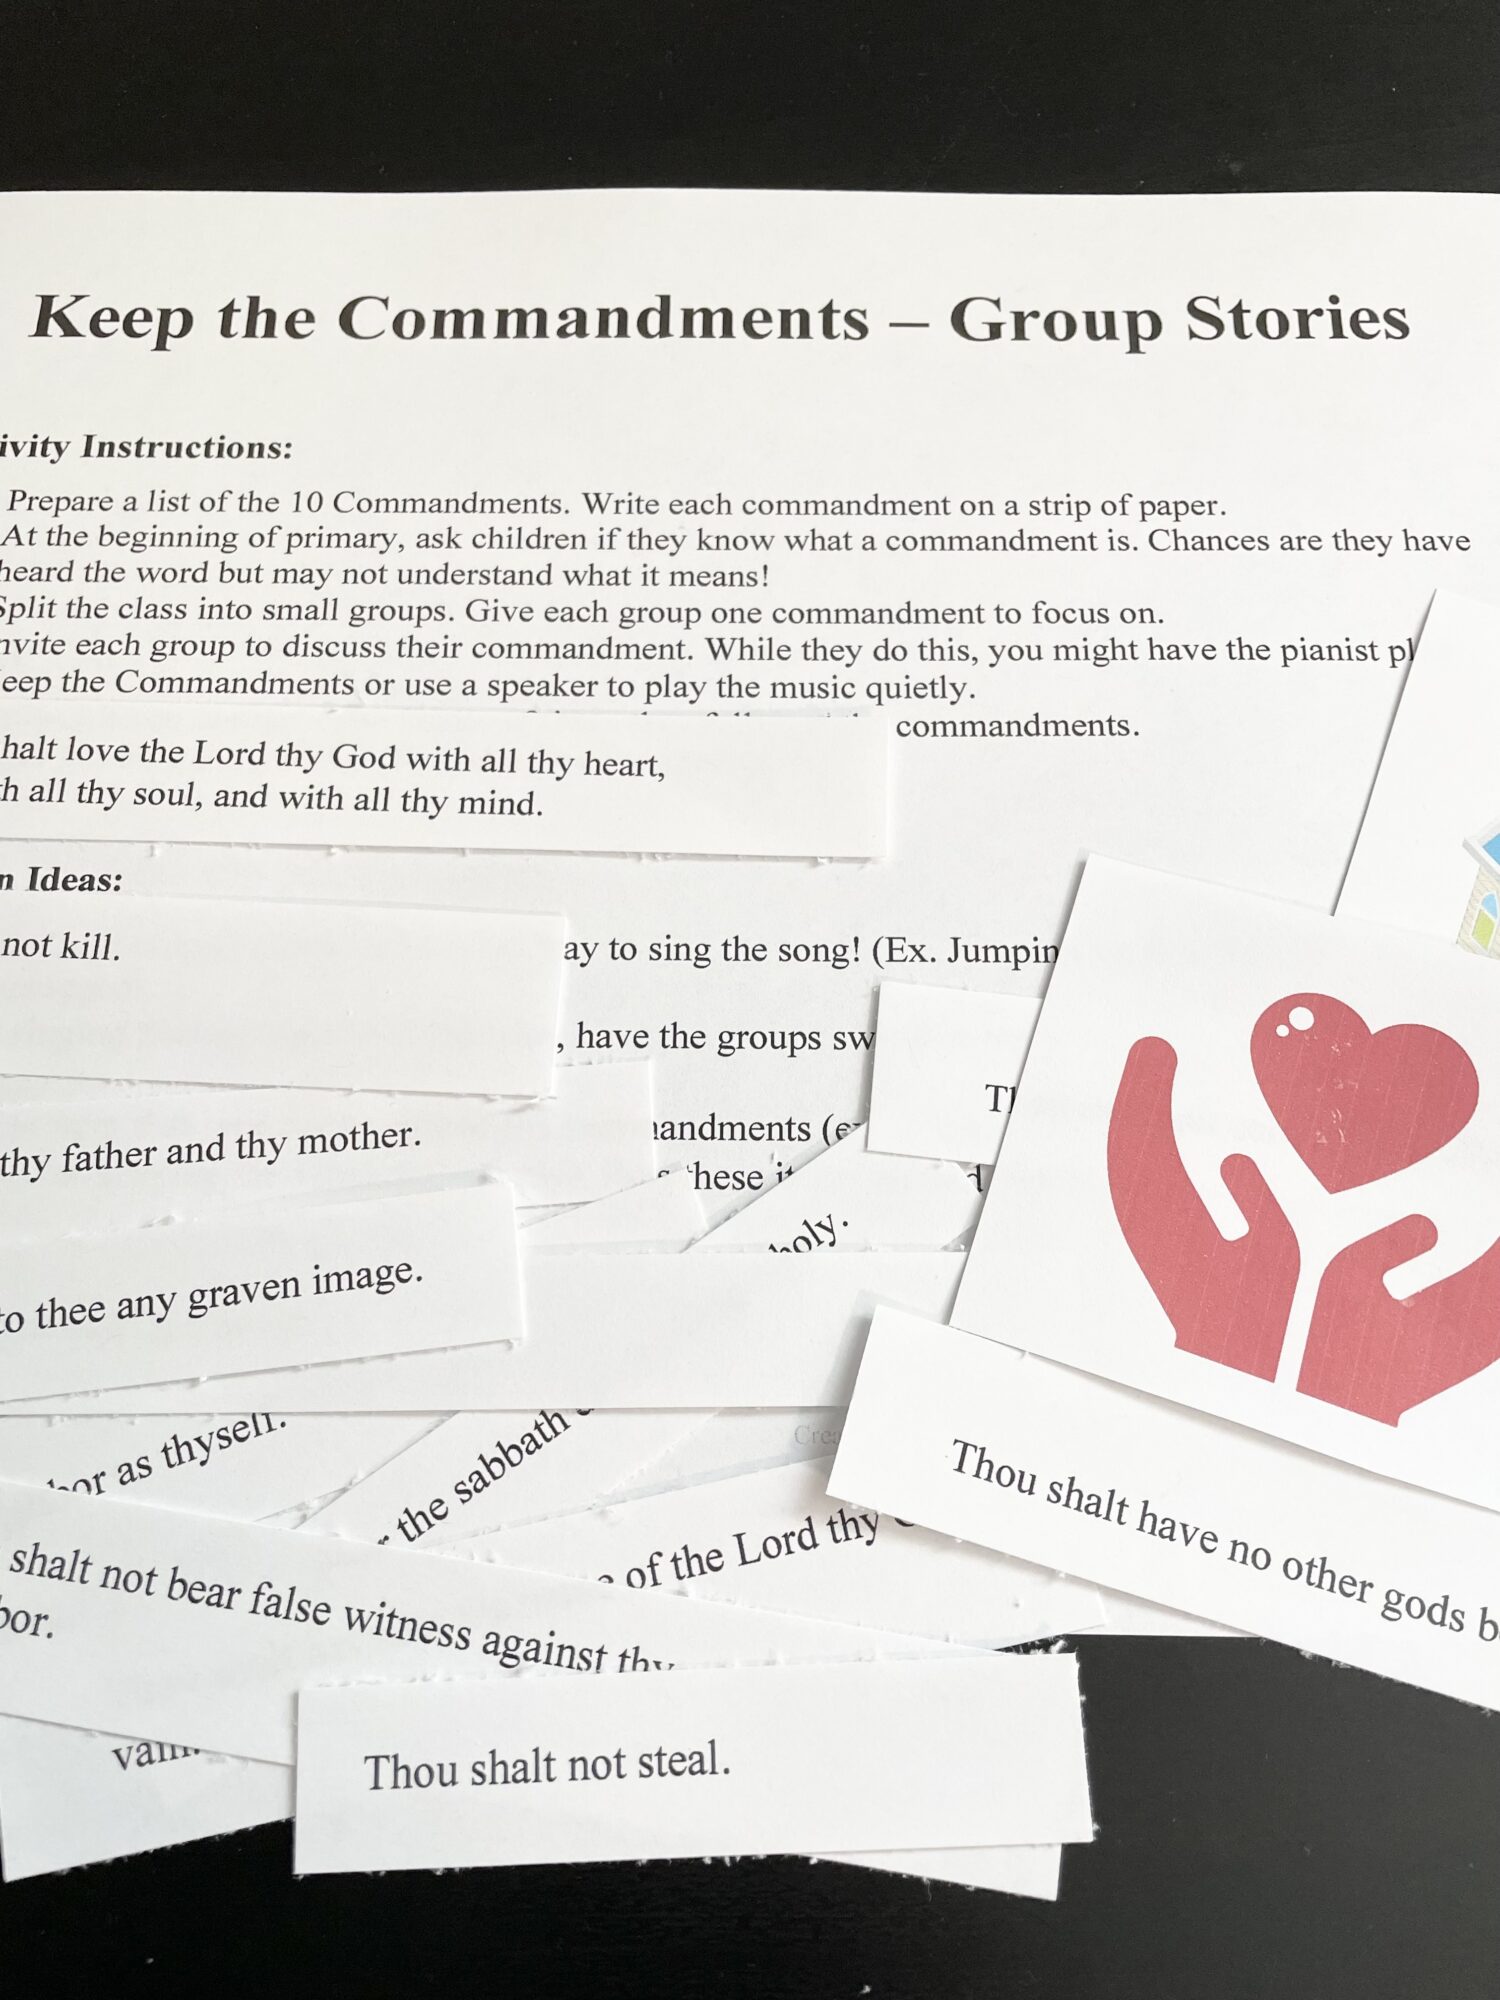 Keep the Commandments - Group Stories Activity Easy ideas for Music Leaders IMG 6197